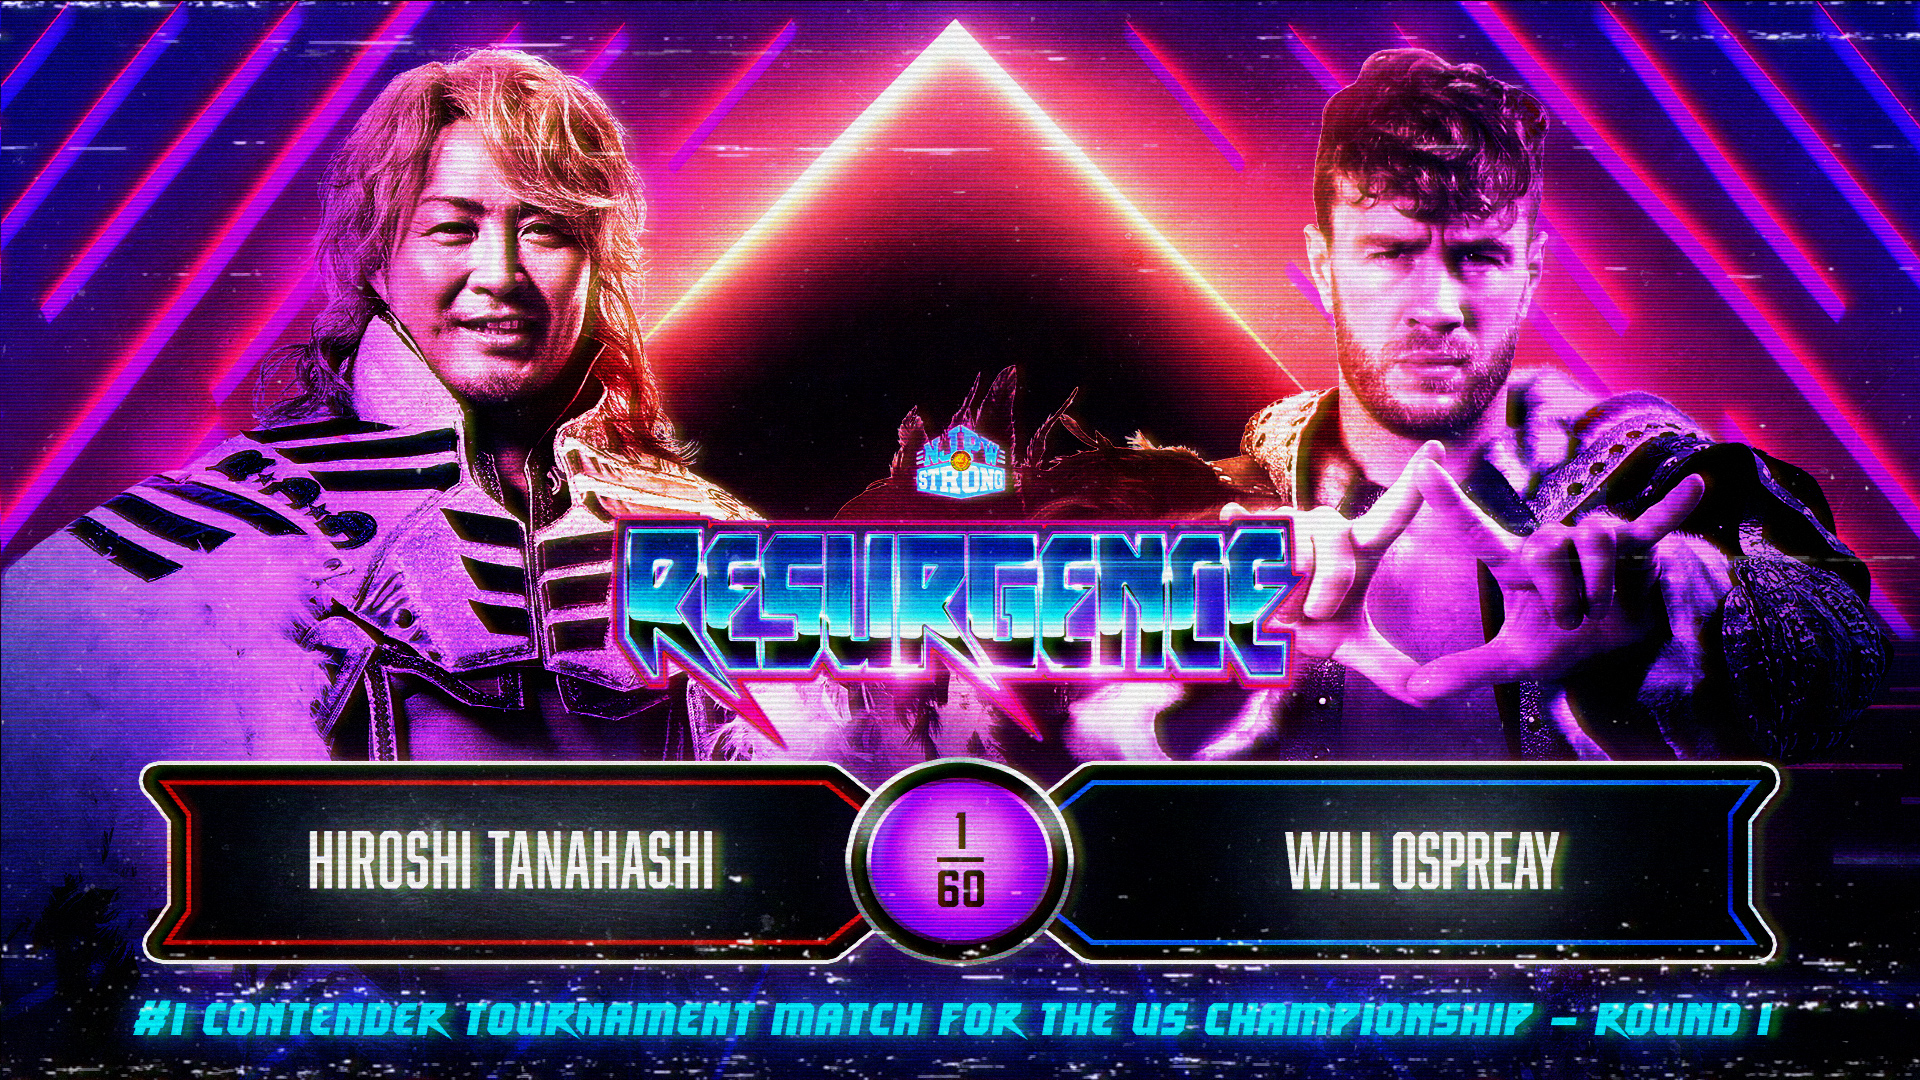 The Feature match for this week's pro wrestling schedule : Tanahashi faces a returning Will Ospreay at resurgence